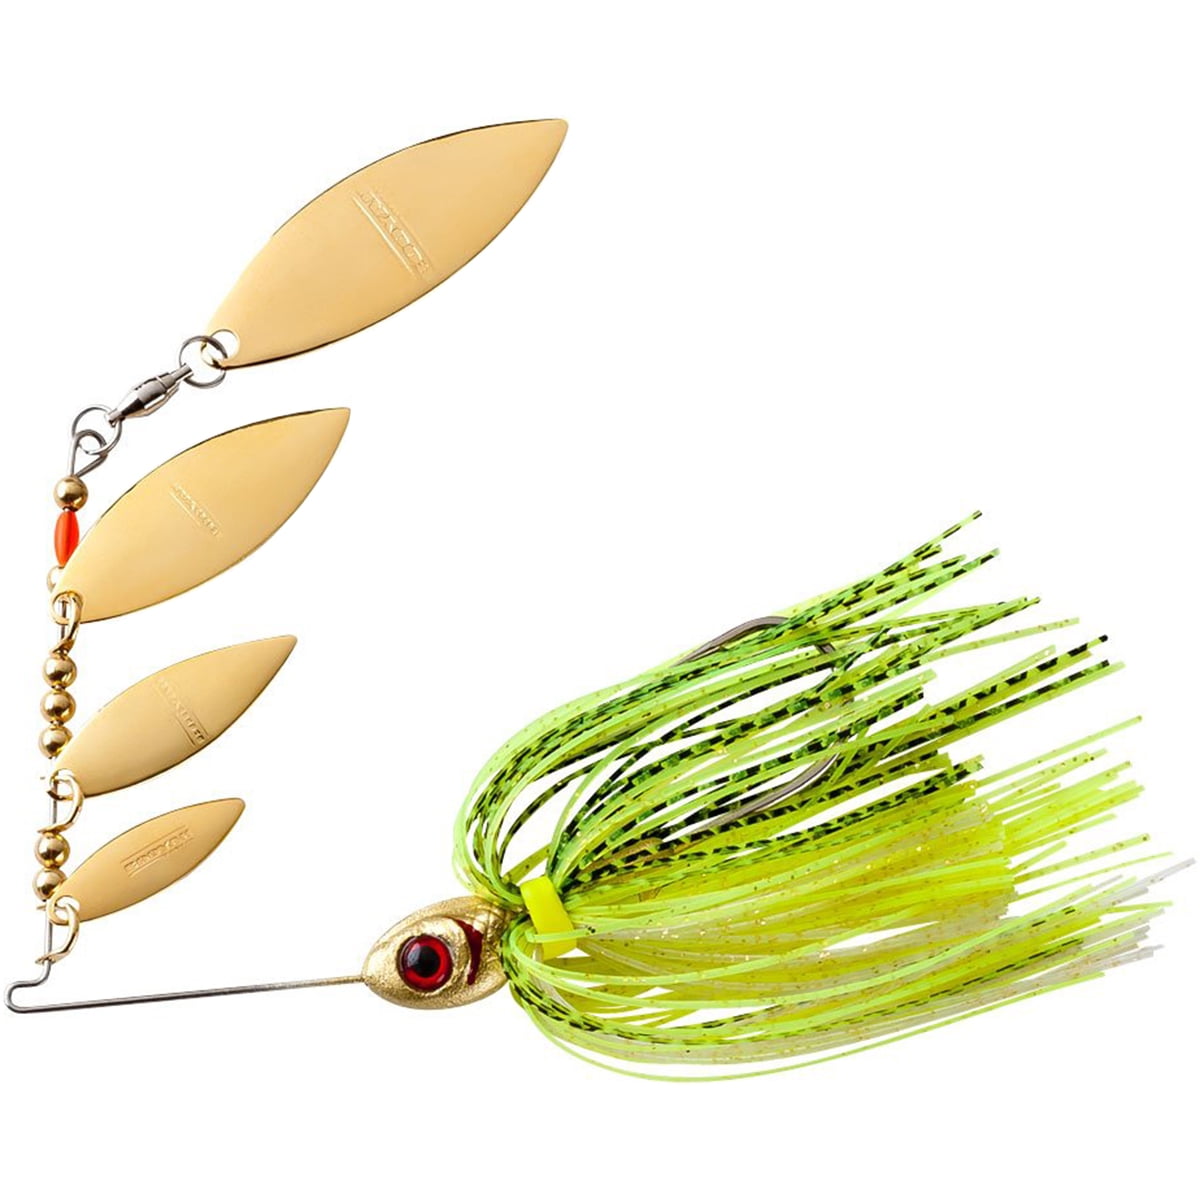 Booyah Baits Super Shad 3/8 oz Fishing Lure - Chartreuse Gold